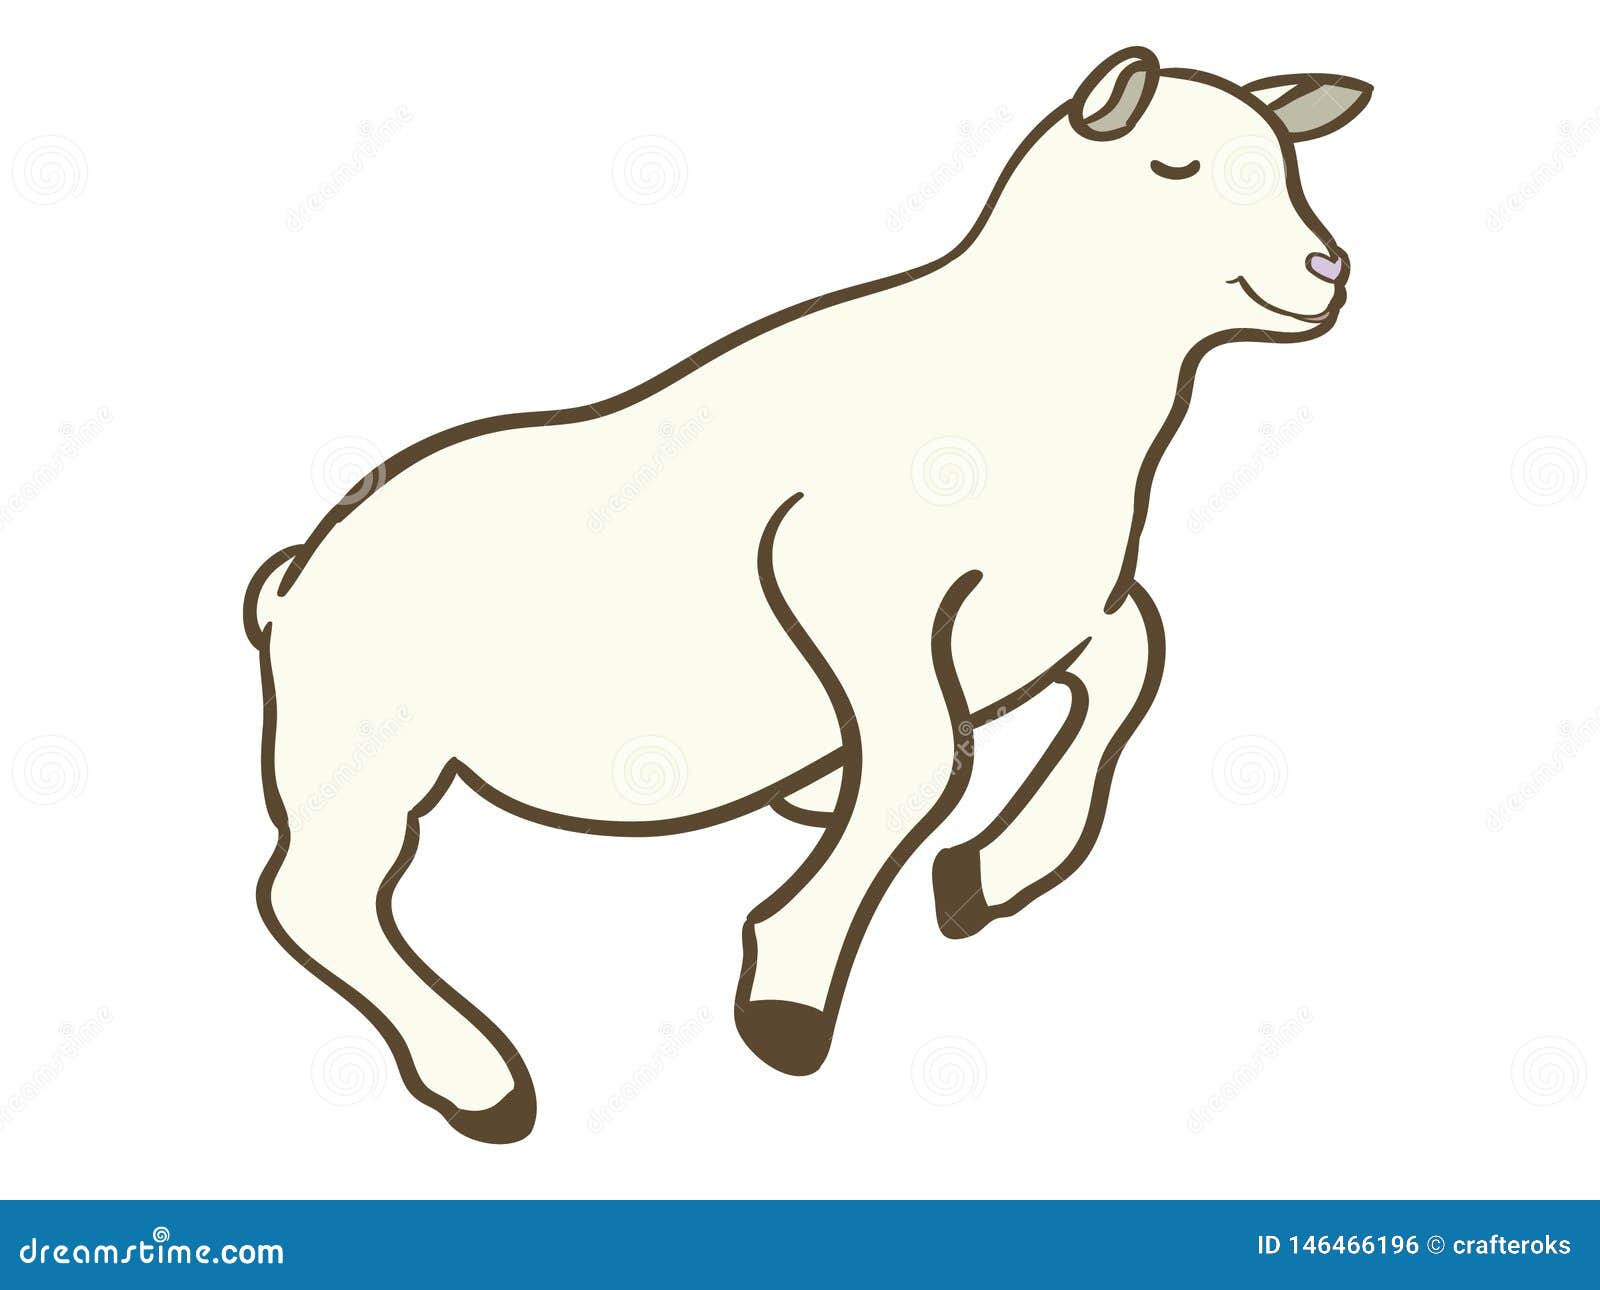 Download Sheep Vector Eps Hand Drawn, Crafteroks, Svg, Free, Free Svg File, Eps, Dxf, Vector, Logo ...